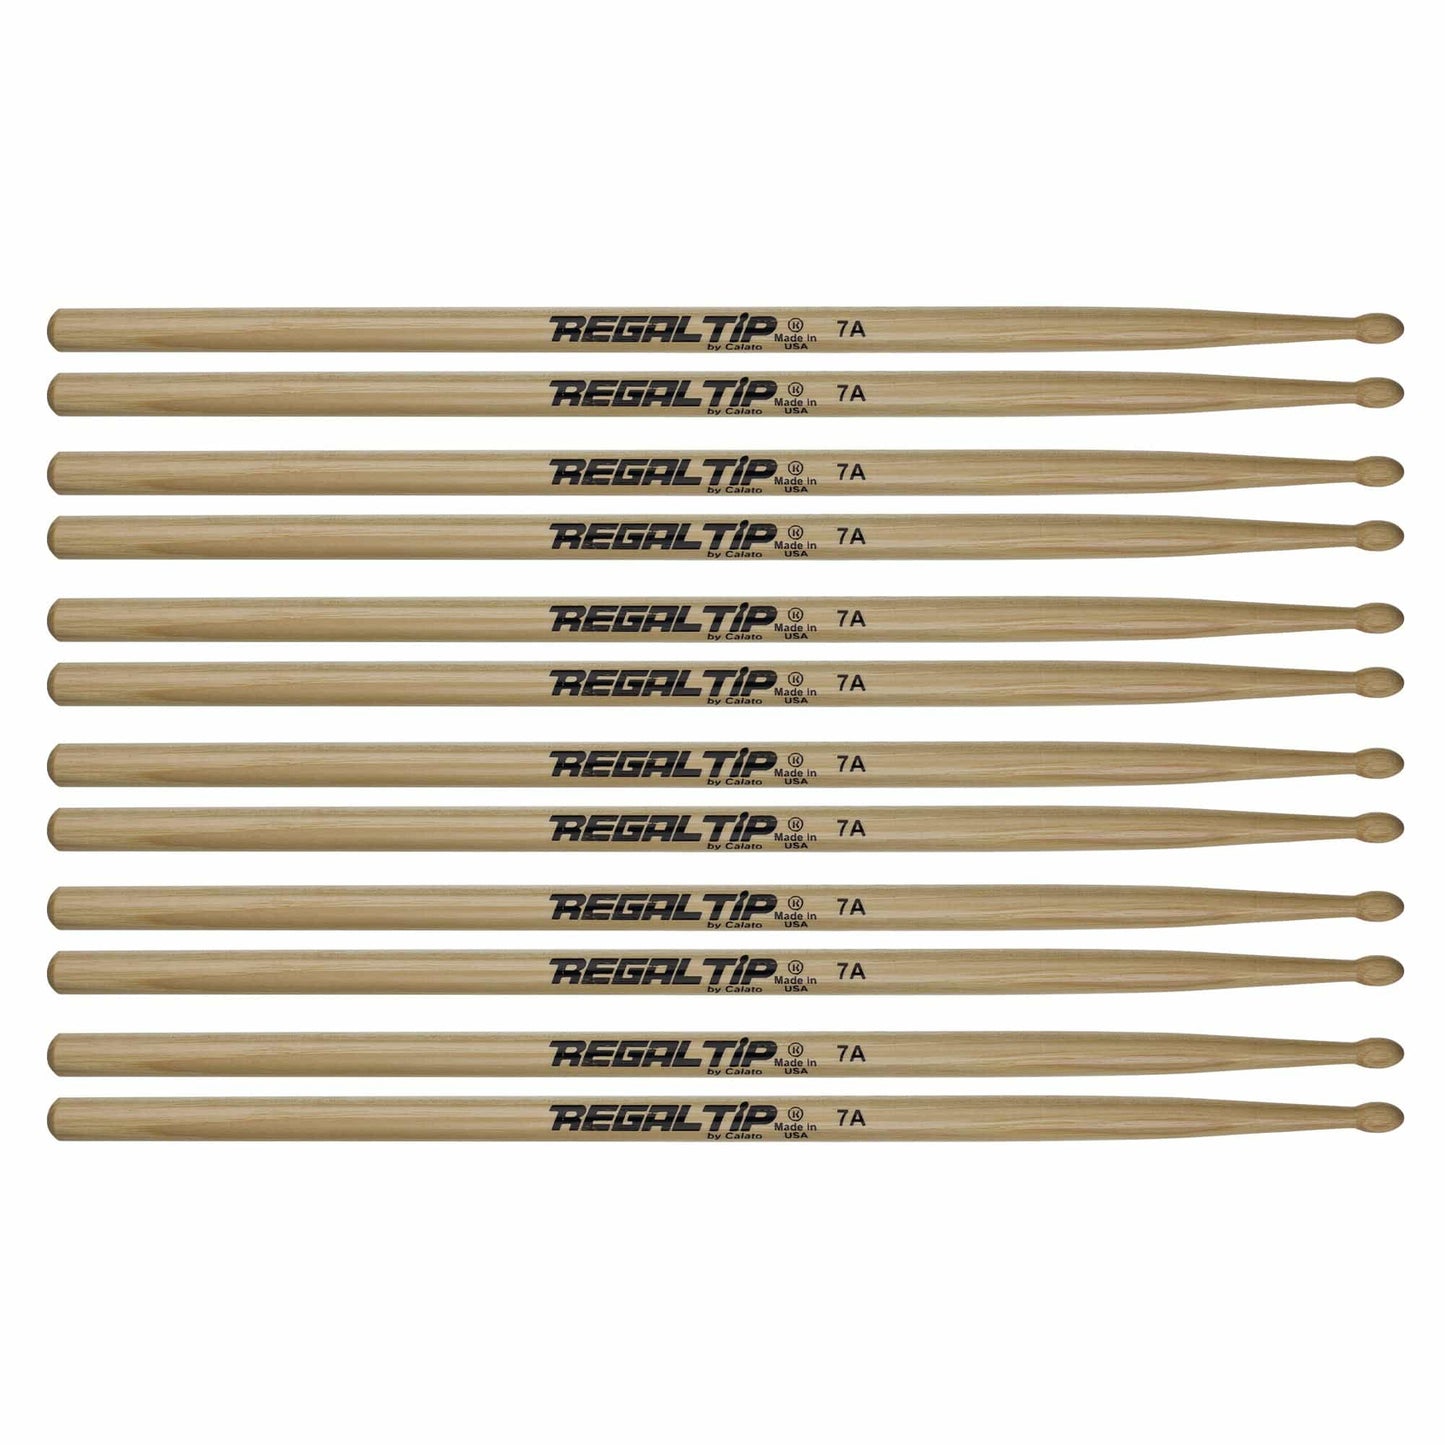 Regal Tip 7A American Hickory Wood Tip Drum Sticks (6 Pair Bundle) Drums and Percussion / Parts and Accessories / Drum Sticks and Mallets